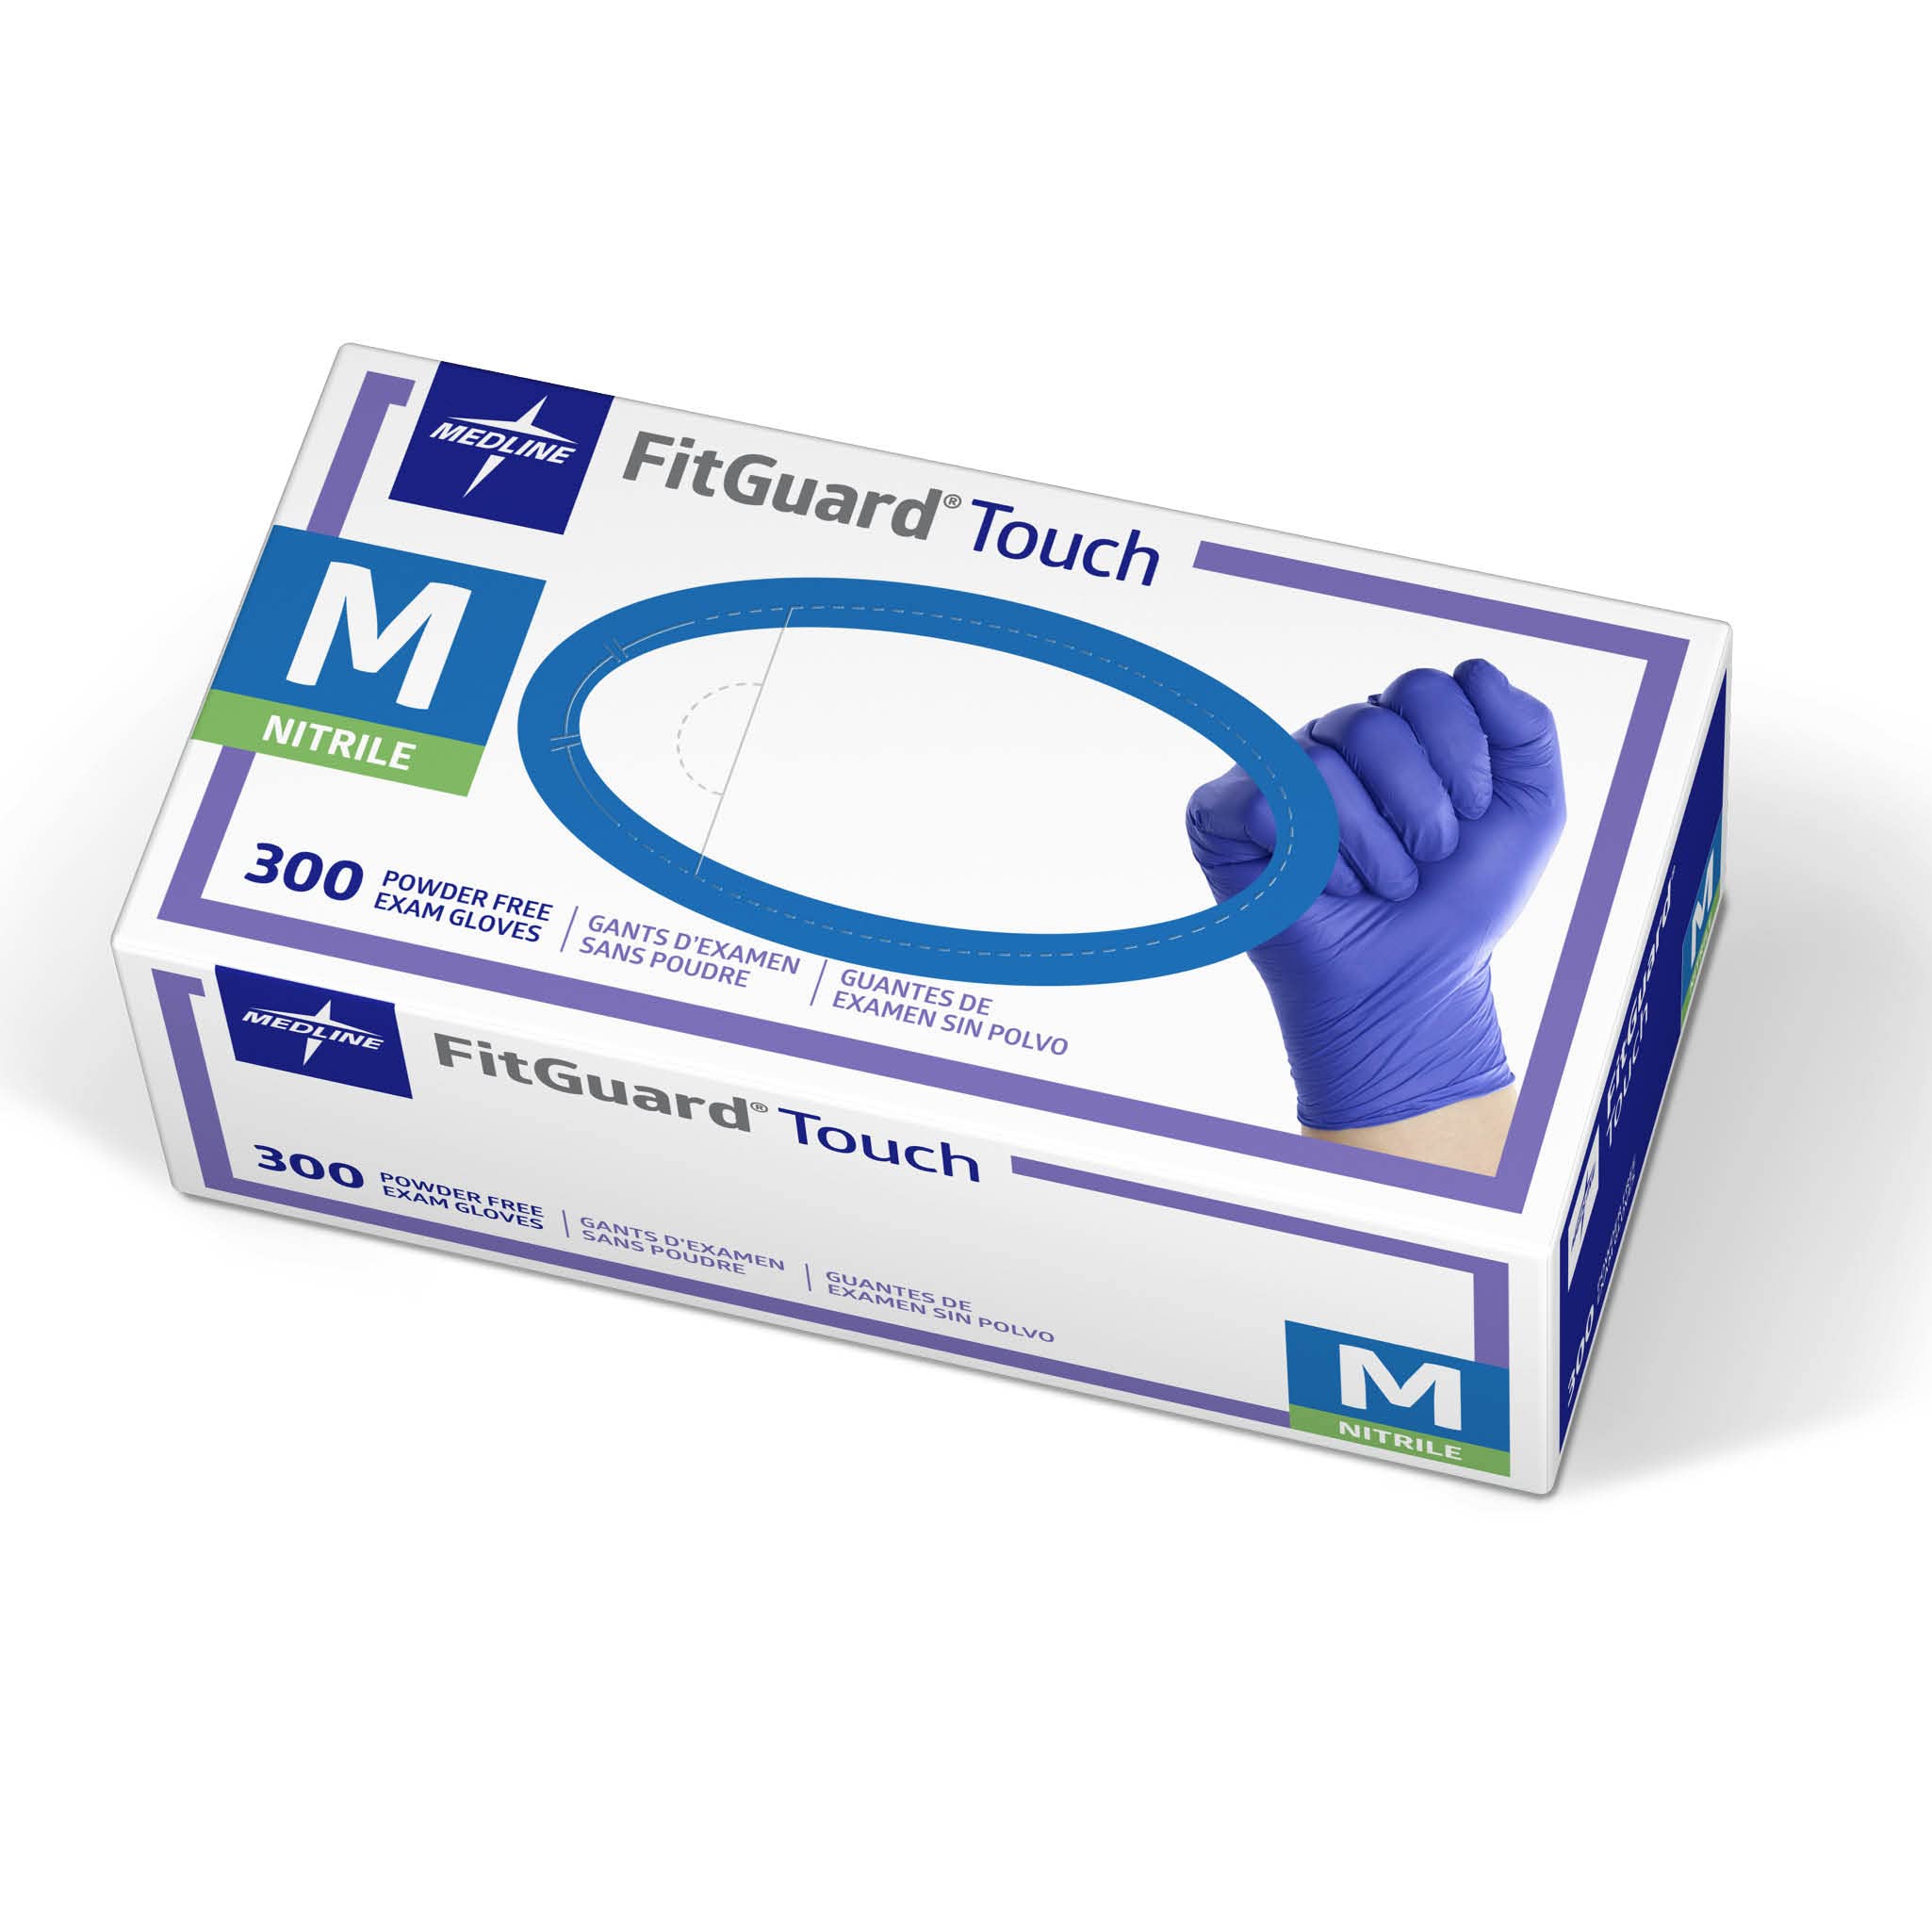 Book Cover Medline FitGuard Touch Nitrile Exam Gloves, 300 Count, Medium, Powder Free, Disposable, Not Made with Natural Rubber Latex, Excellent Sense of Touch for Medical Tasks, Durable for Household Chores Medium (Box of 300)